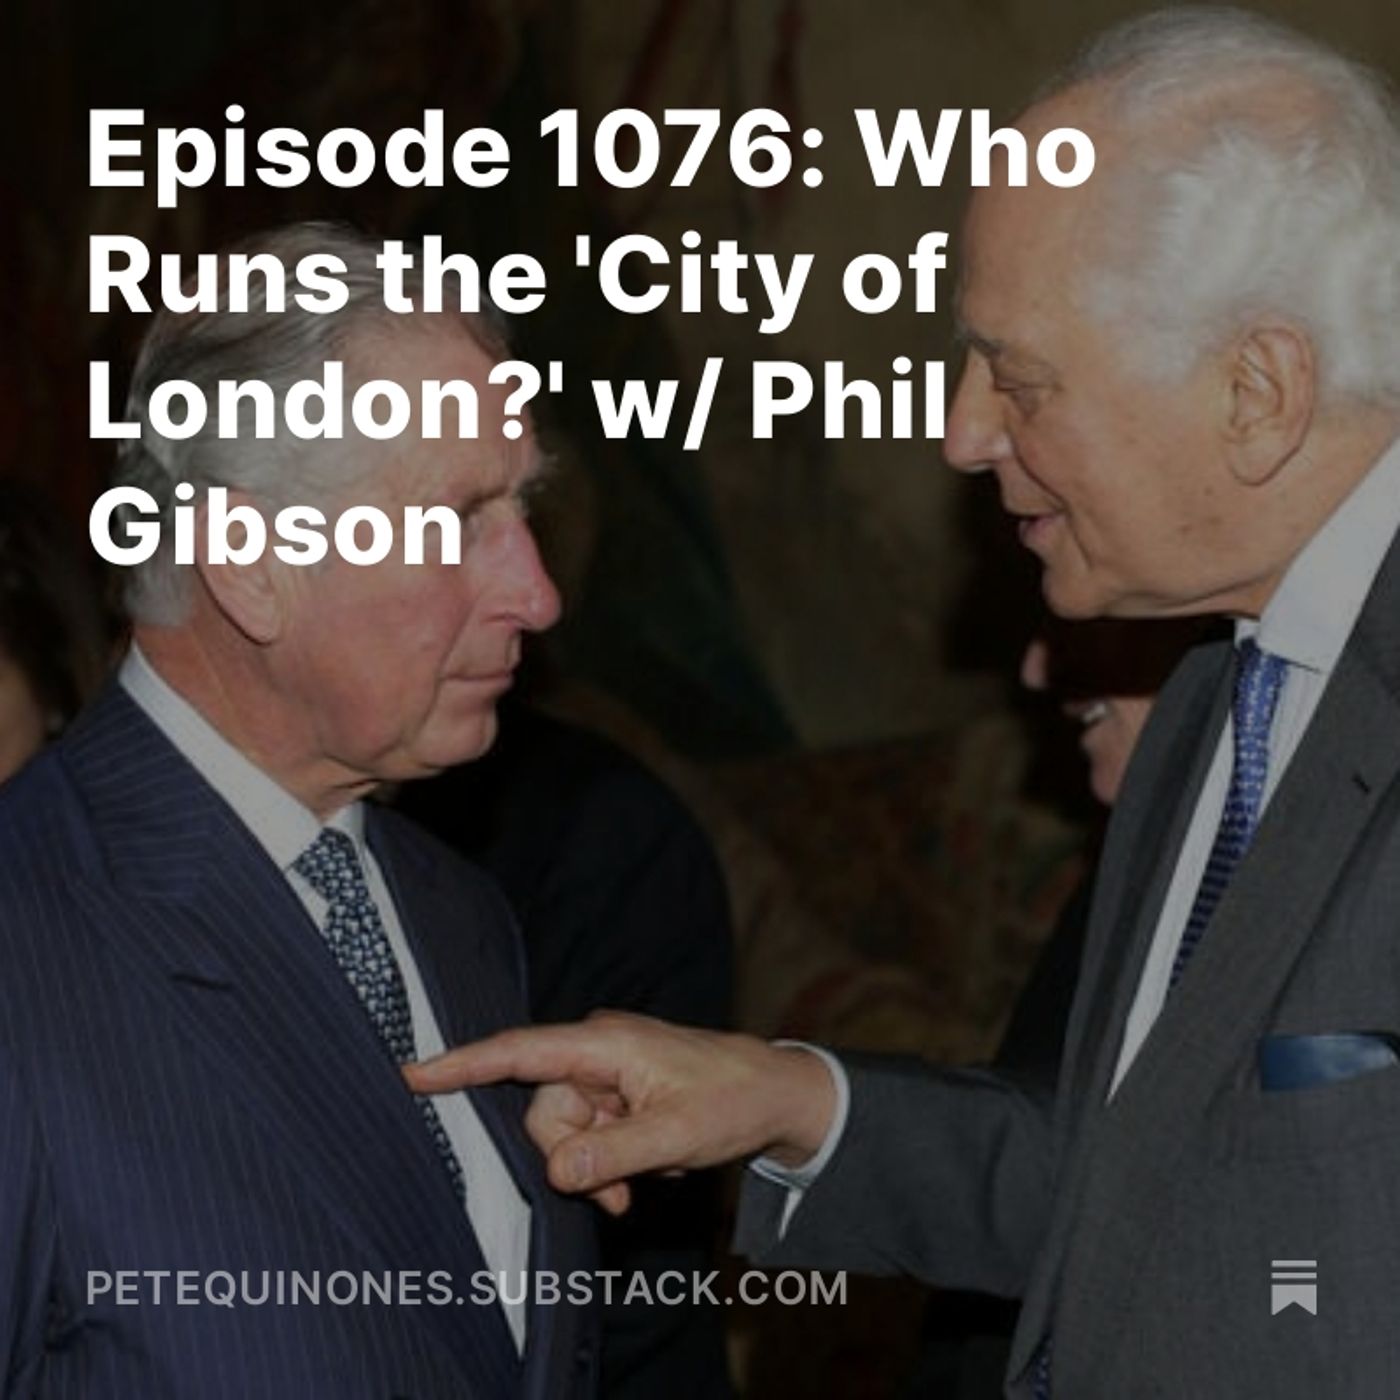 Episode 1076: Who Runs the 'City of London?' w/ Phil Gibson